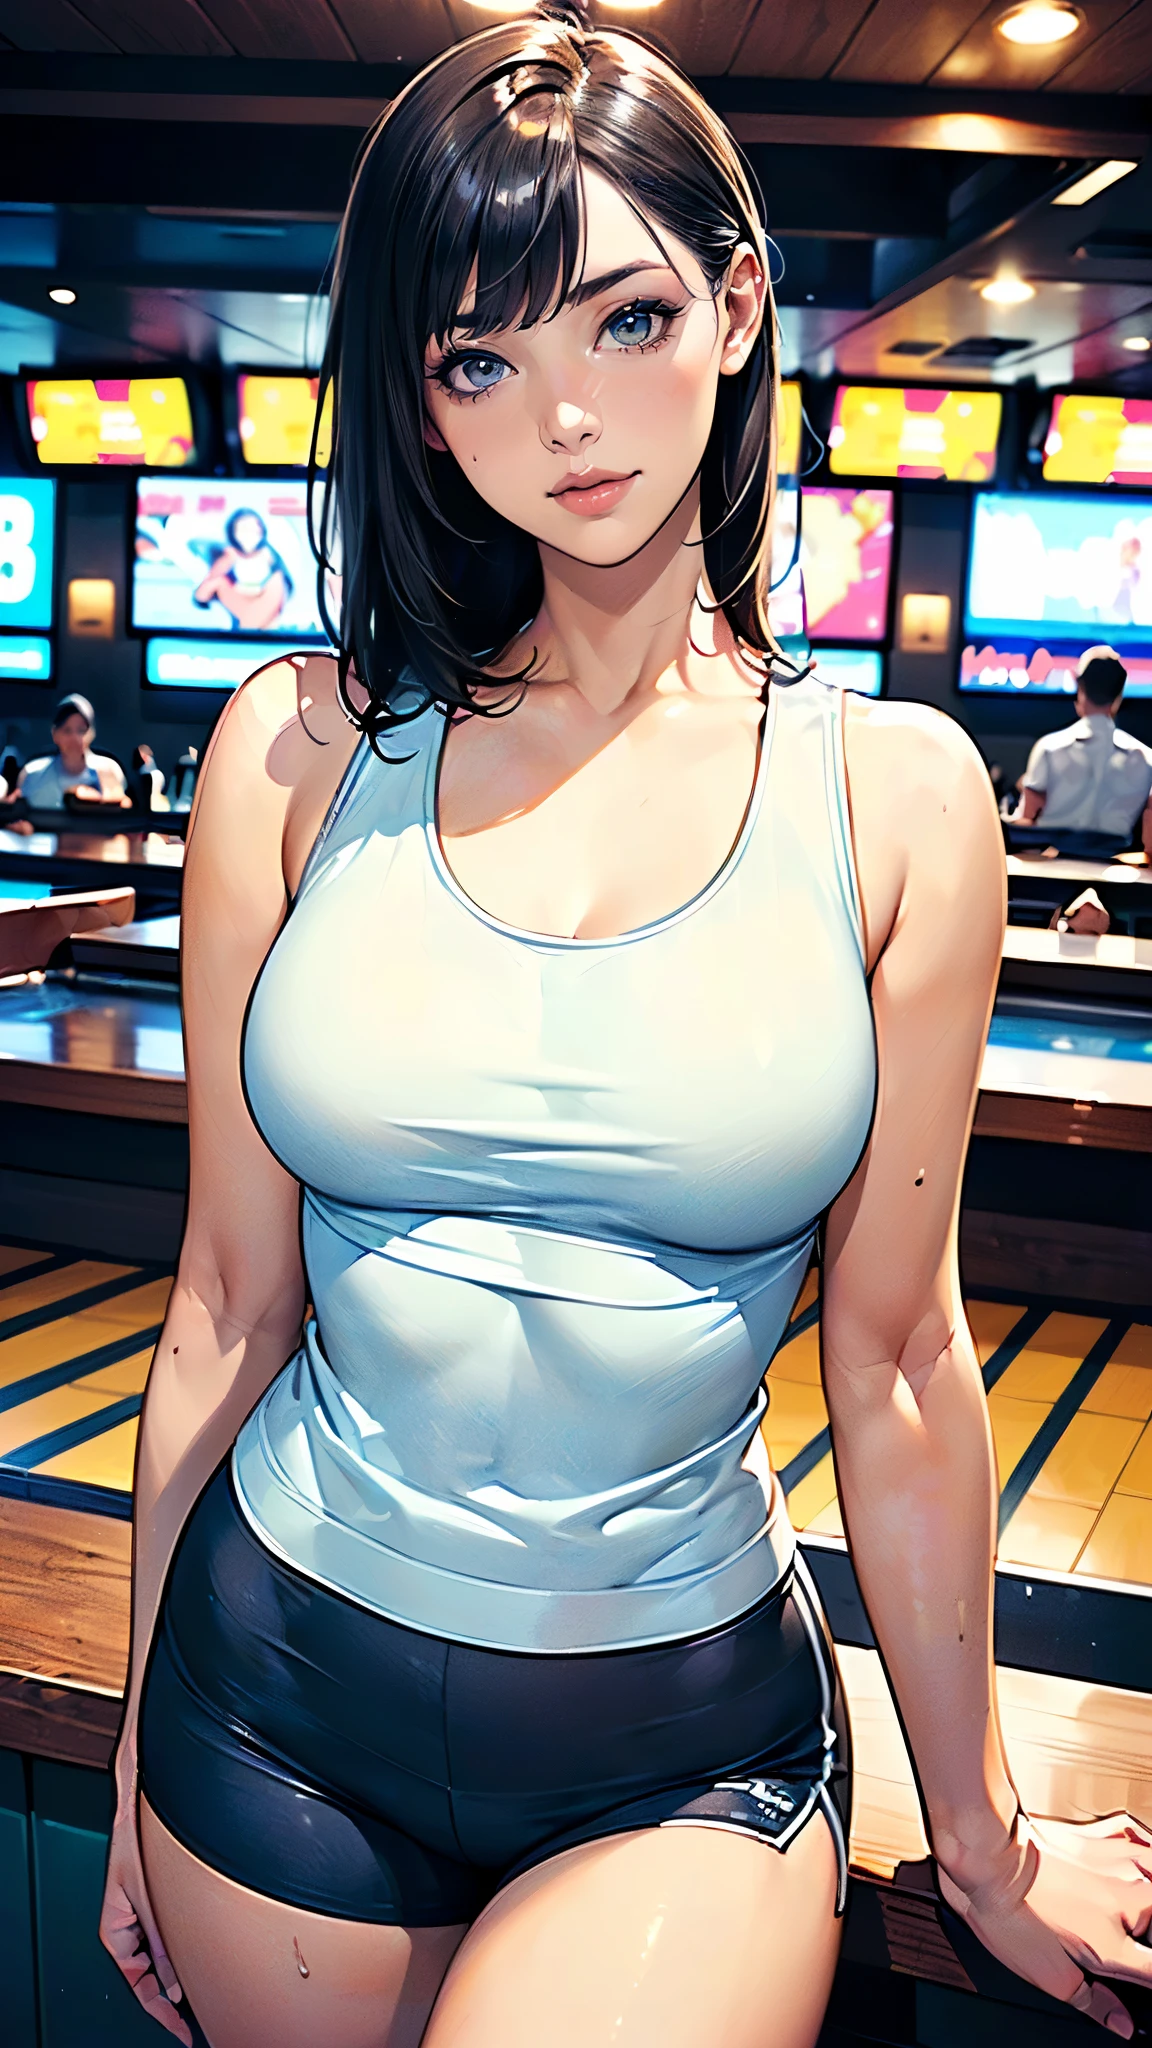 masterpiece,highest quality,Very detailed,High resolution,8k,wallpaper,Perfect lighting,BREAK(One Woman),(Mature woman working as a waiter at a sports bar:1.5),(50 years old),(hooters),(((A very form fitting white tank top:1.5))),((The tank top has the logo of a sports bar on it.:1.5)),(((tiny orange shorts))),(((Very detailed costume drawings:1.5))),(Beautiful Eyes:1.5),(Detailed face drawing:1.5),(Detailed face drawing:1.5),((Very detailed female hand:1.5)),(Shiny skin:1.2),(Big Breasts:1.2),(Thick thighs:1.5),(Sensual body:1.5),(Sports bar background:1.5),(((Blur the background:1.5))),(((I&#39;m embarrassed:1.5)))